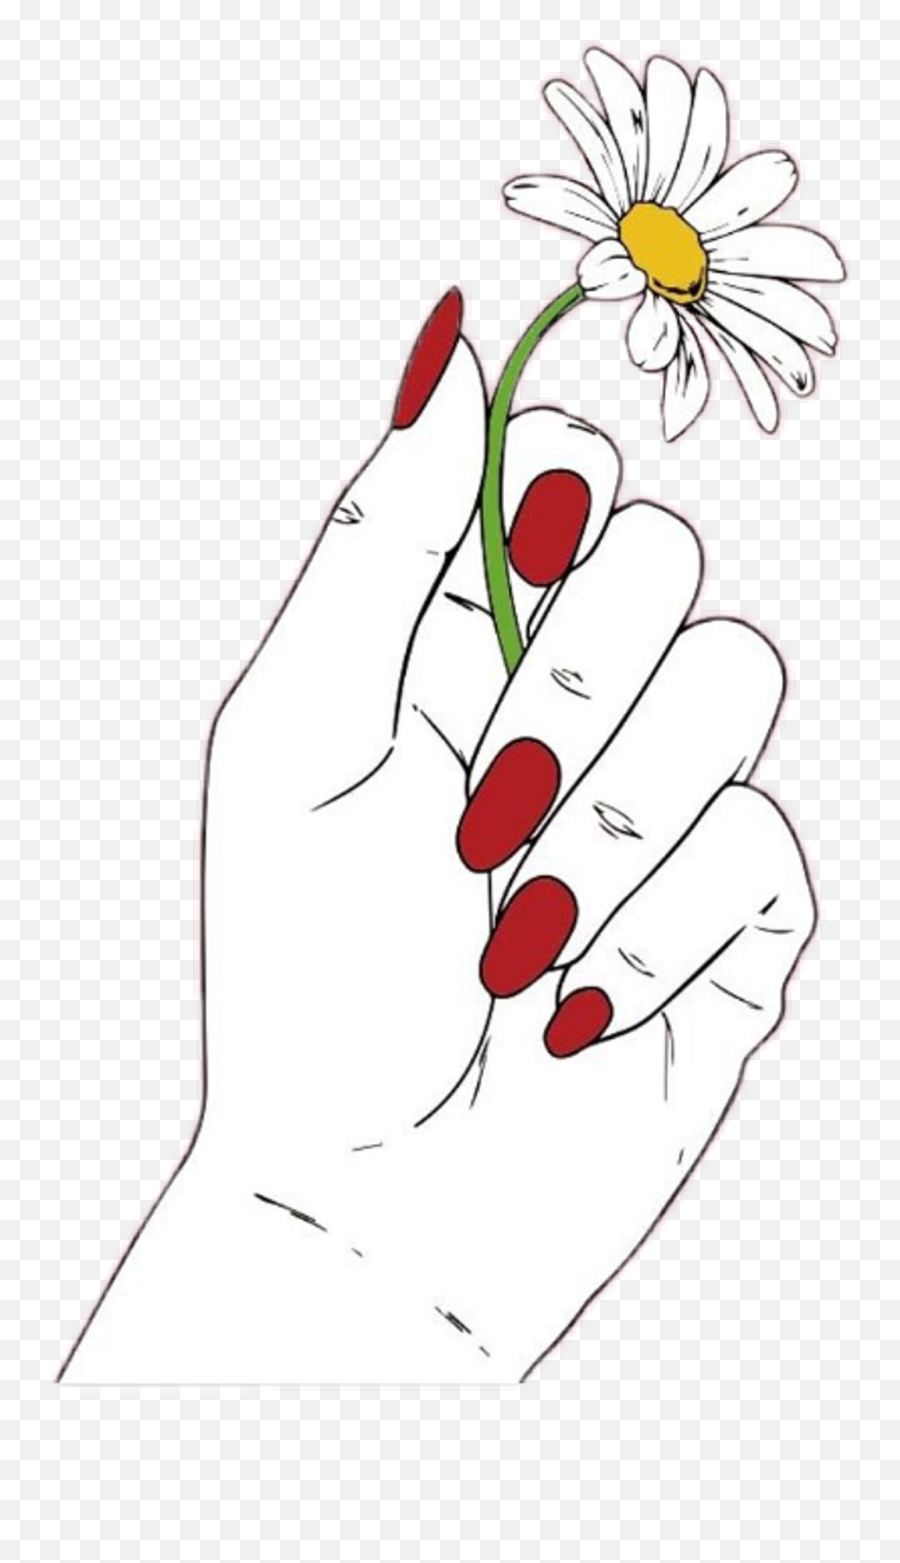 Drawing Of Hands Holding Flowers Png - Drawing Of Hands Holding A Flower,Transparent Flower Drawing Tumblr